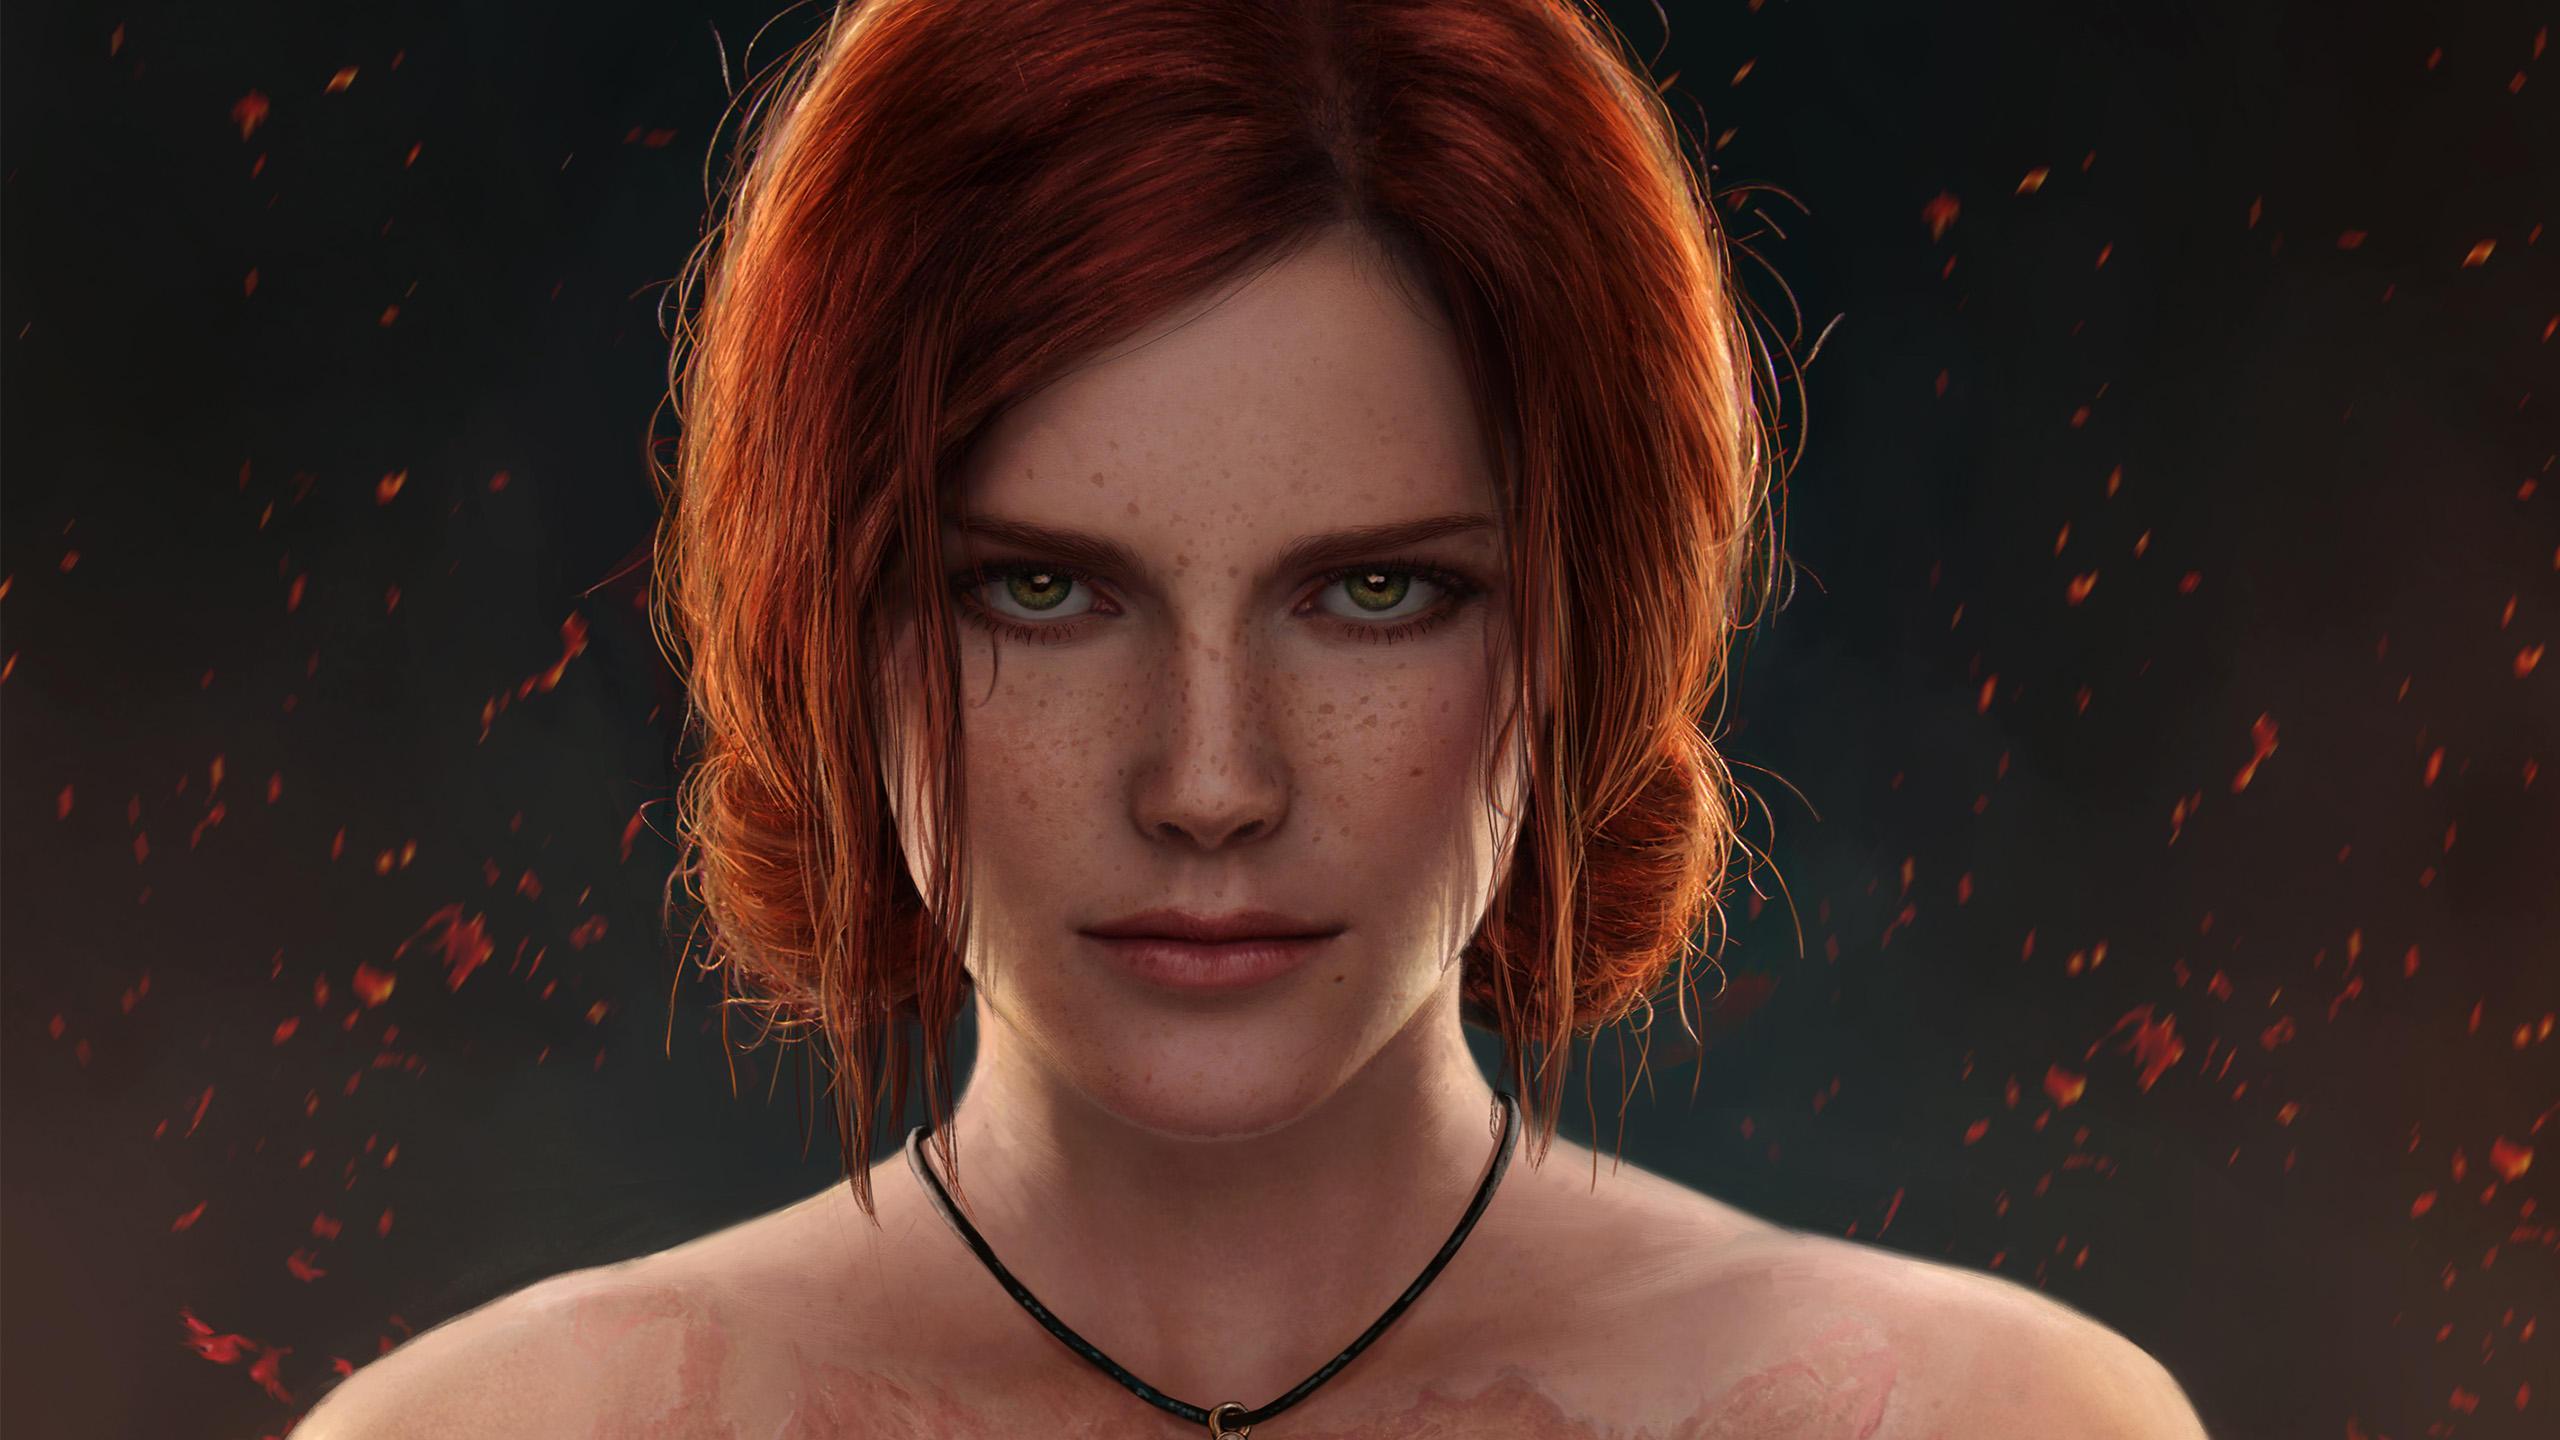 General 2560x1440 video games redhead looking at viewer women Triss Merigold The Witcher The Witcher 3: Wild Hunt freckles green eyes digital art artwork sorceress minimalism simple background